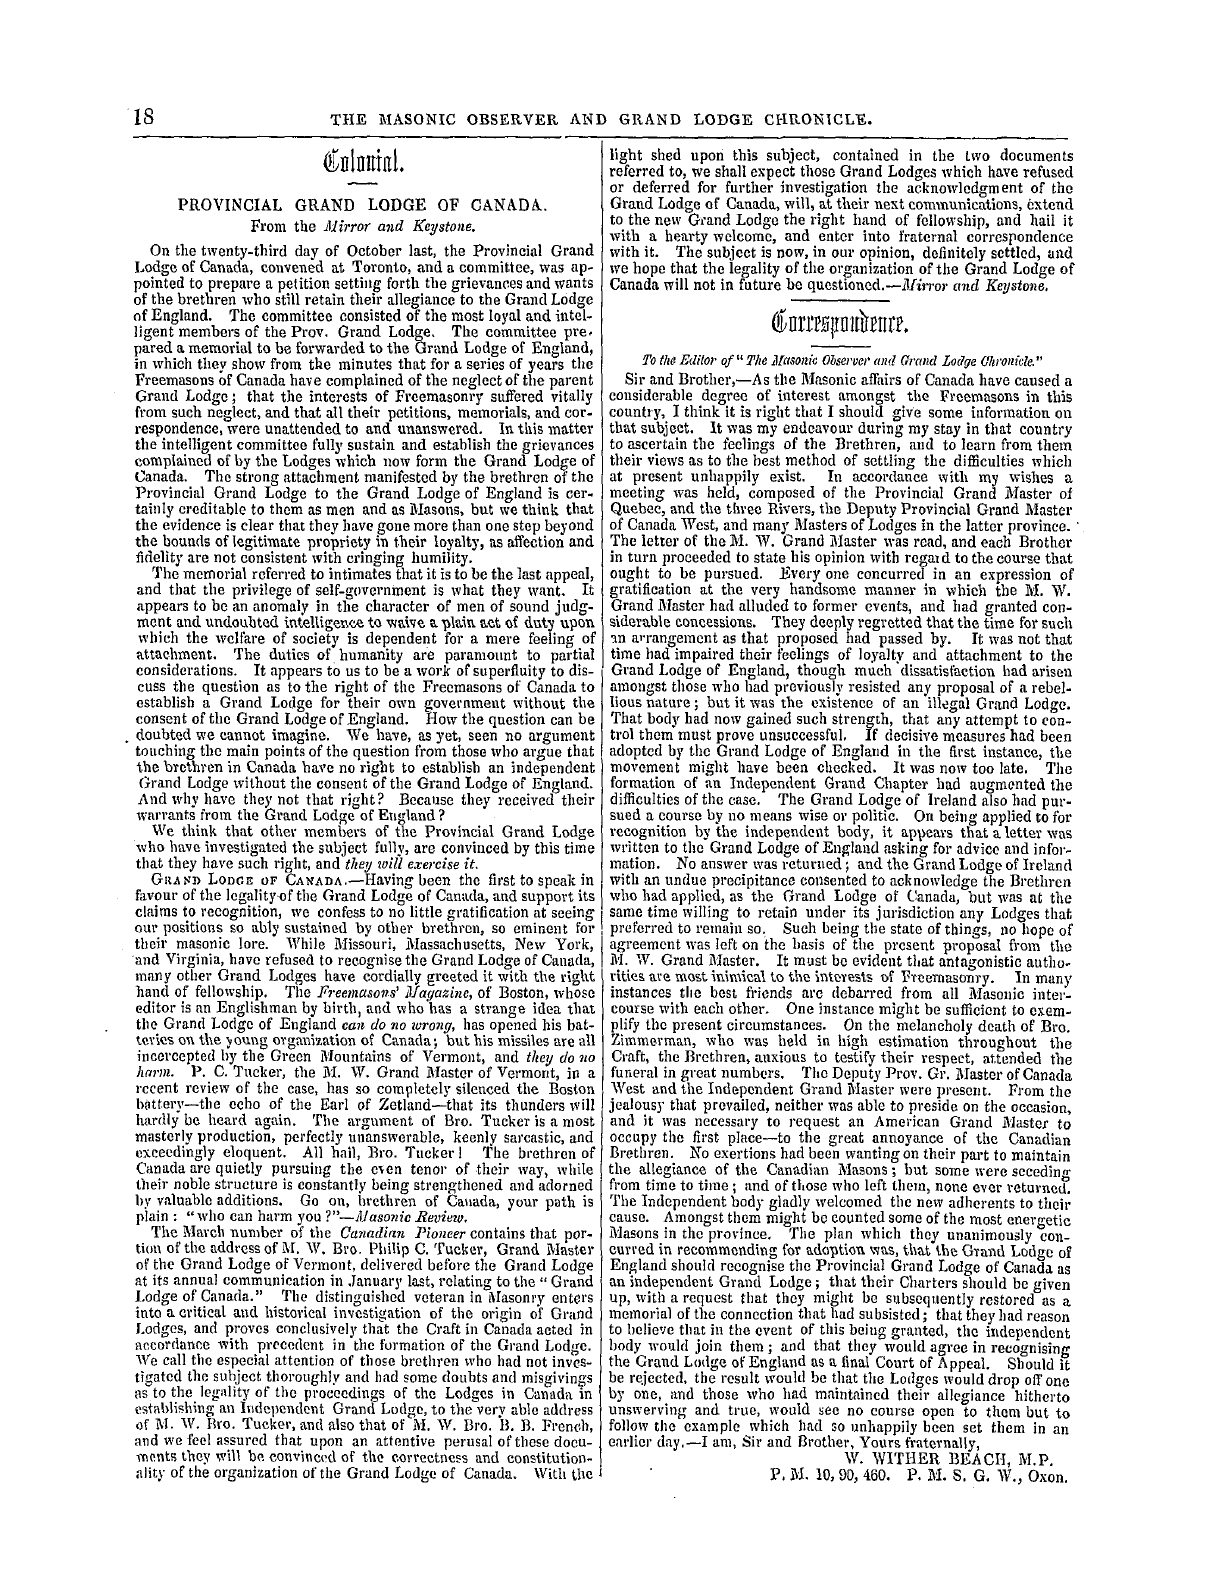 The Masonic Observer: 1857-06-20 - Colonial.